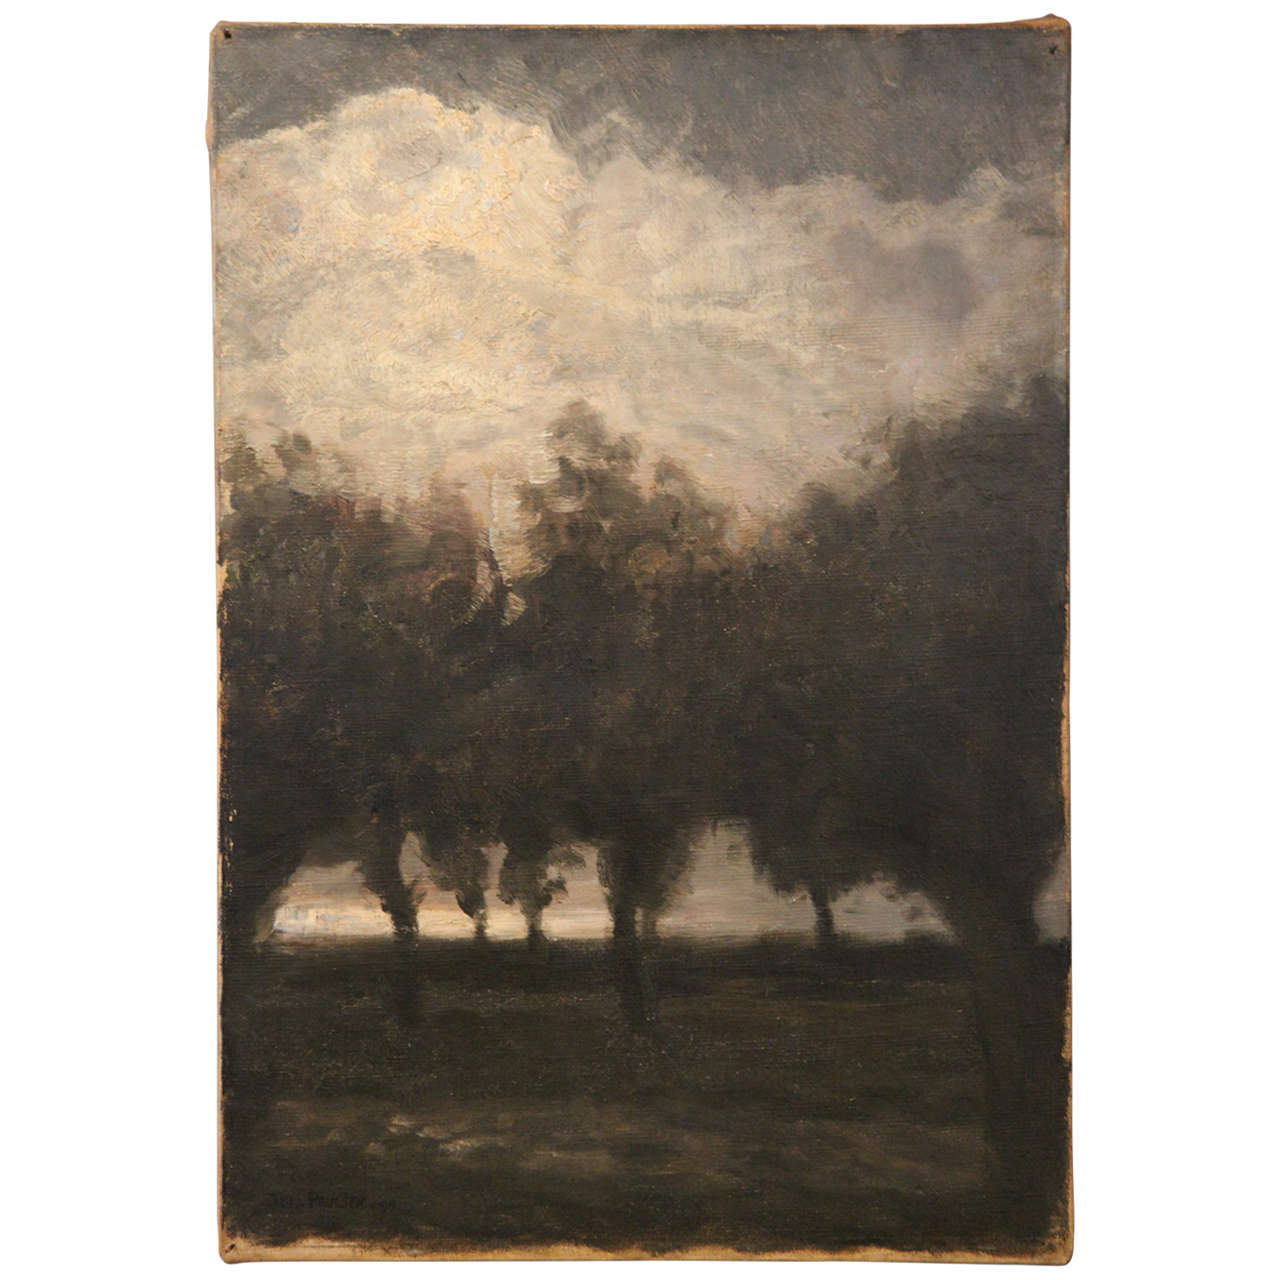 'Trees and Clouds' by Julius Paulsen Dated 1899, Oil on Canvas Painting